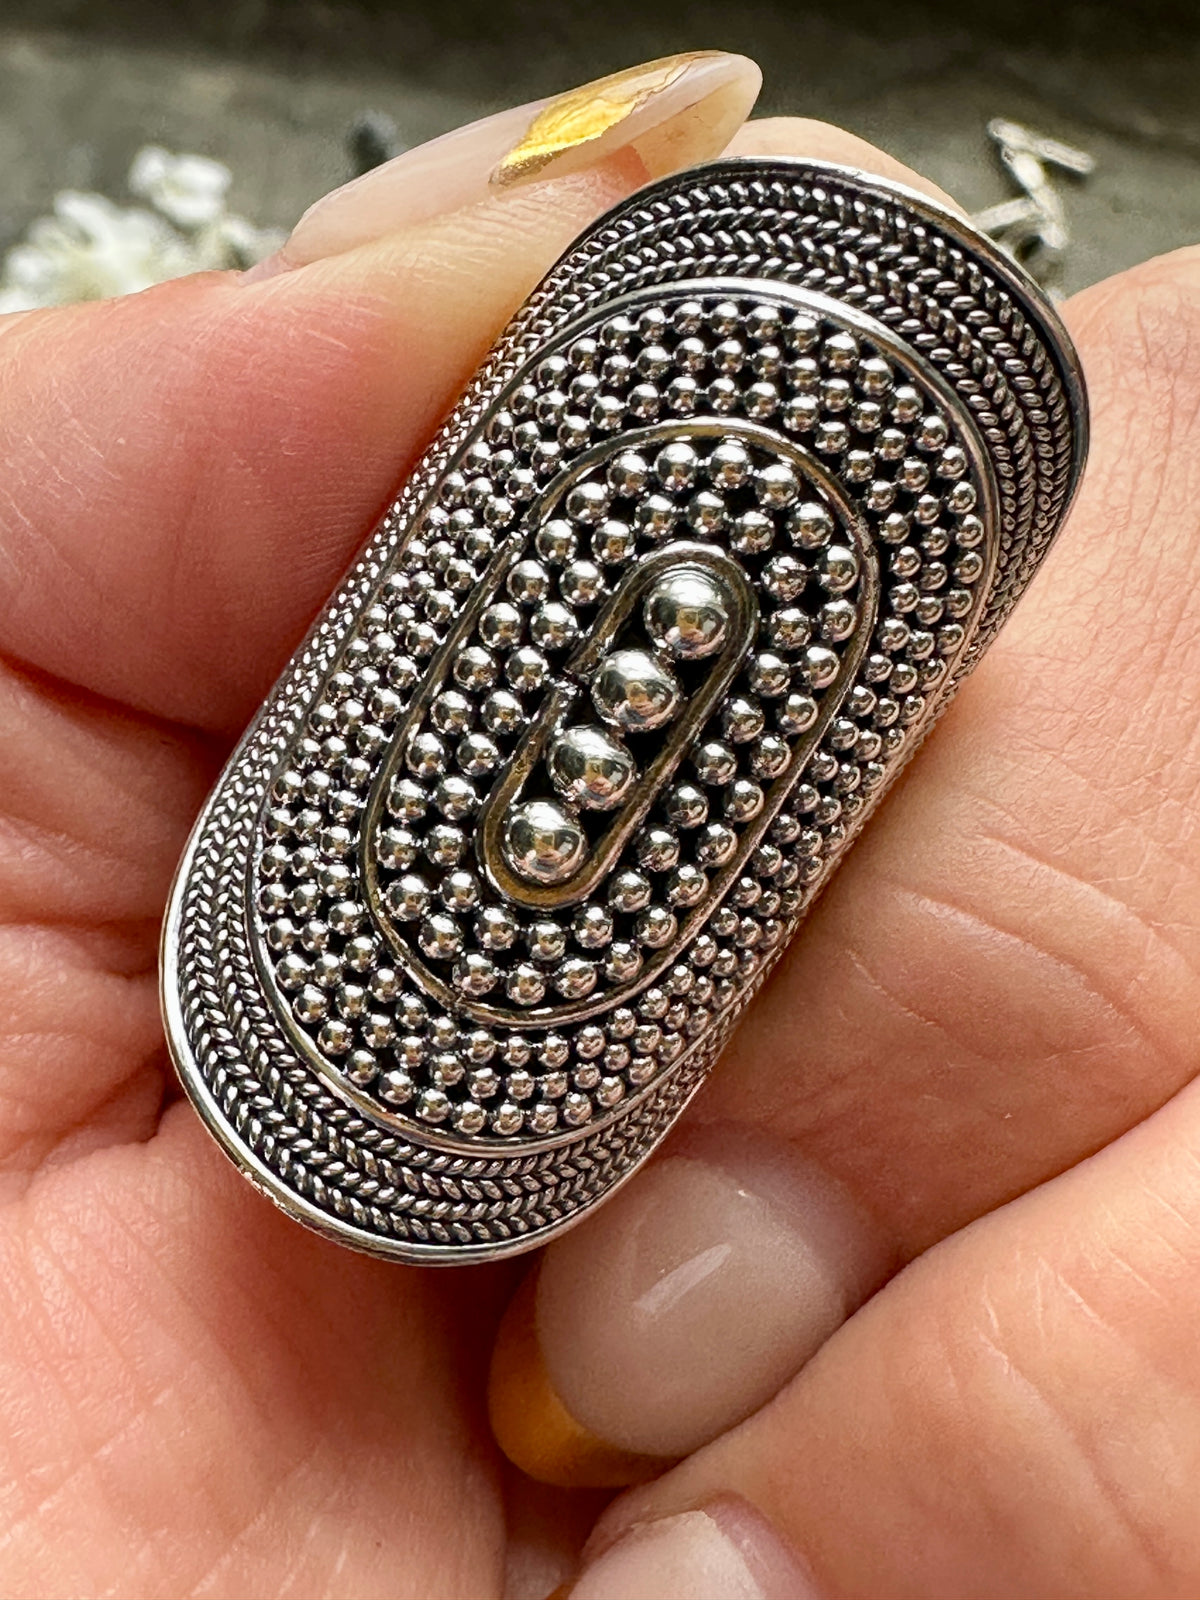 Exquisite Beaded Wrap Ring: Handcrafted 925 Solid Silver Statement Piece for Unparalleled Style and Elegance - Perfect for Any Occasion!